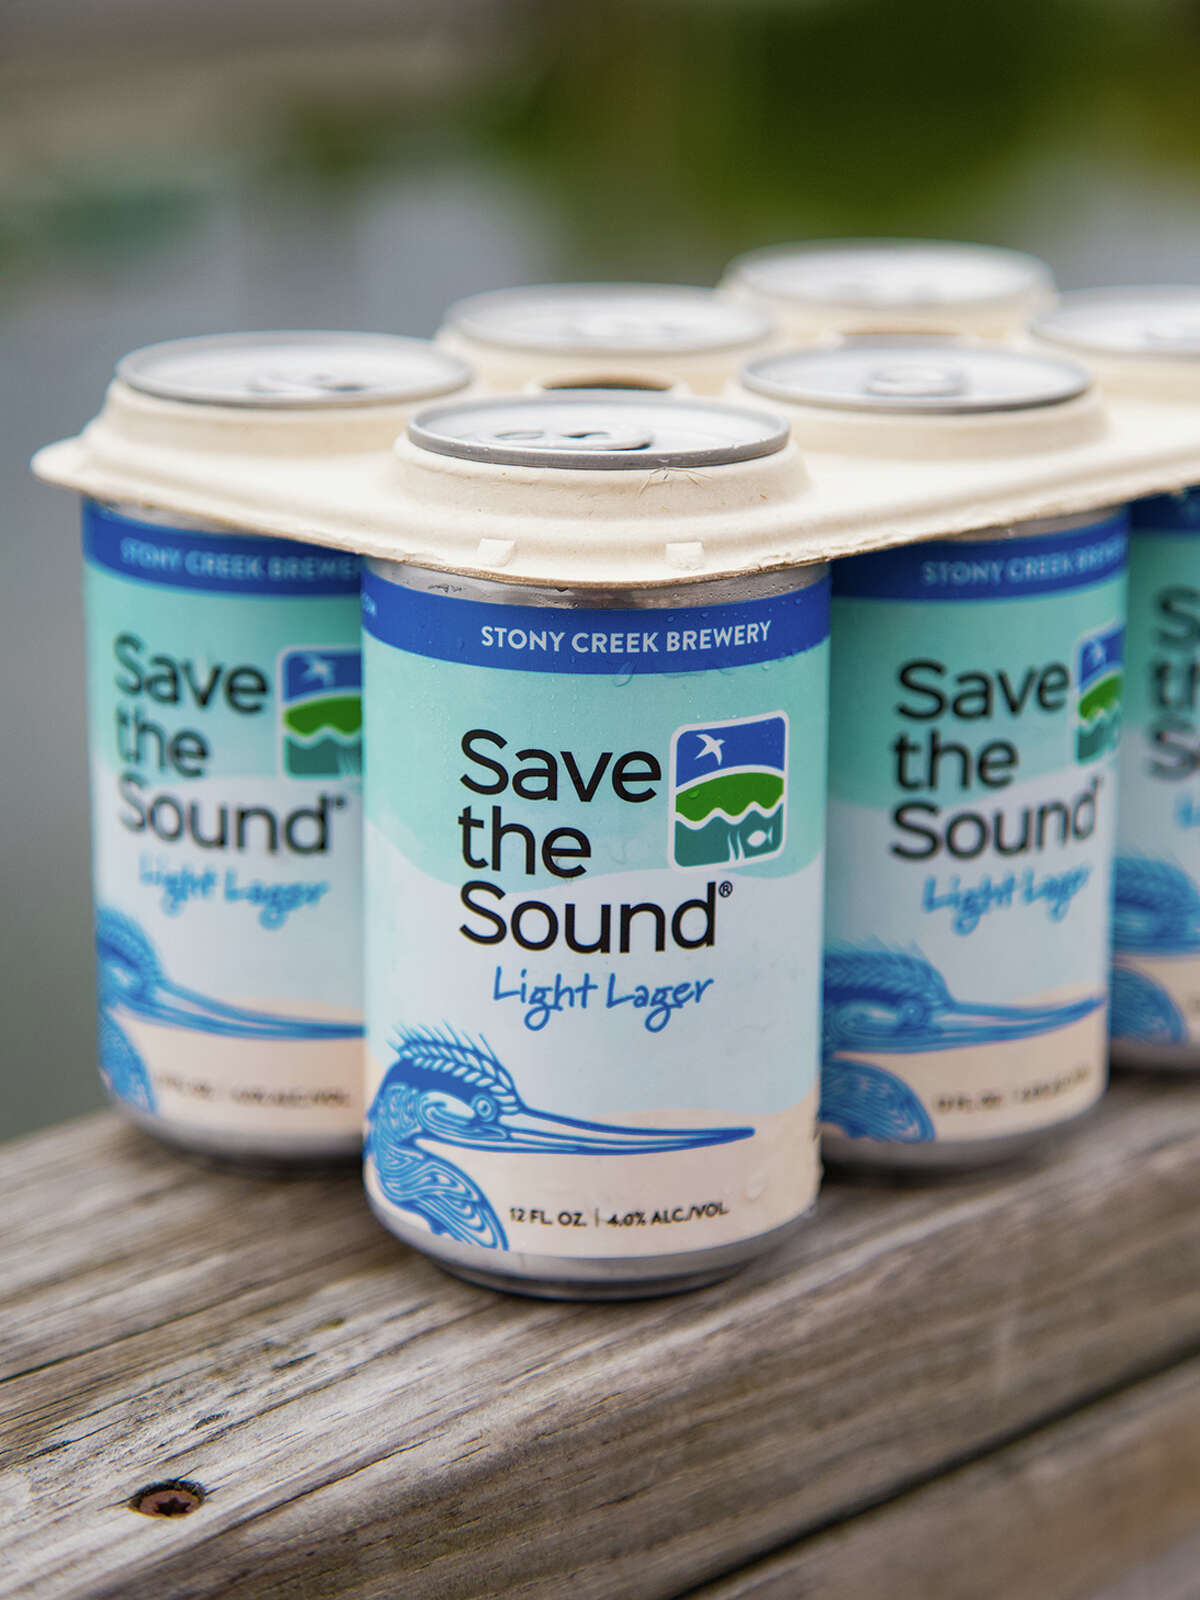 Save the Sound Light Lager, by Stony Creek Brewery.